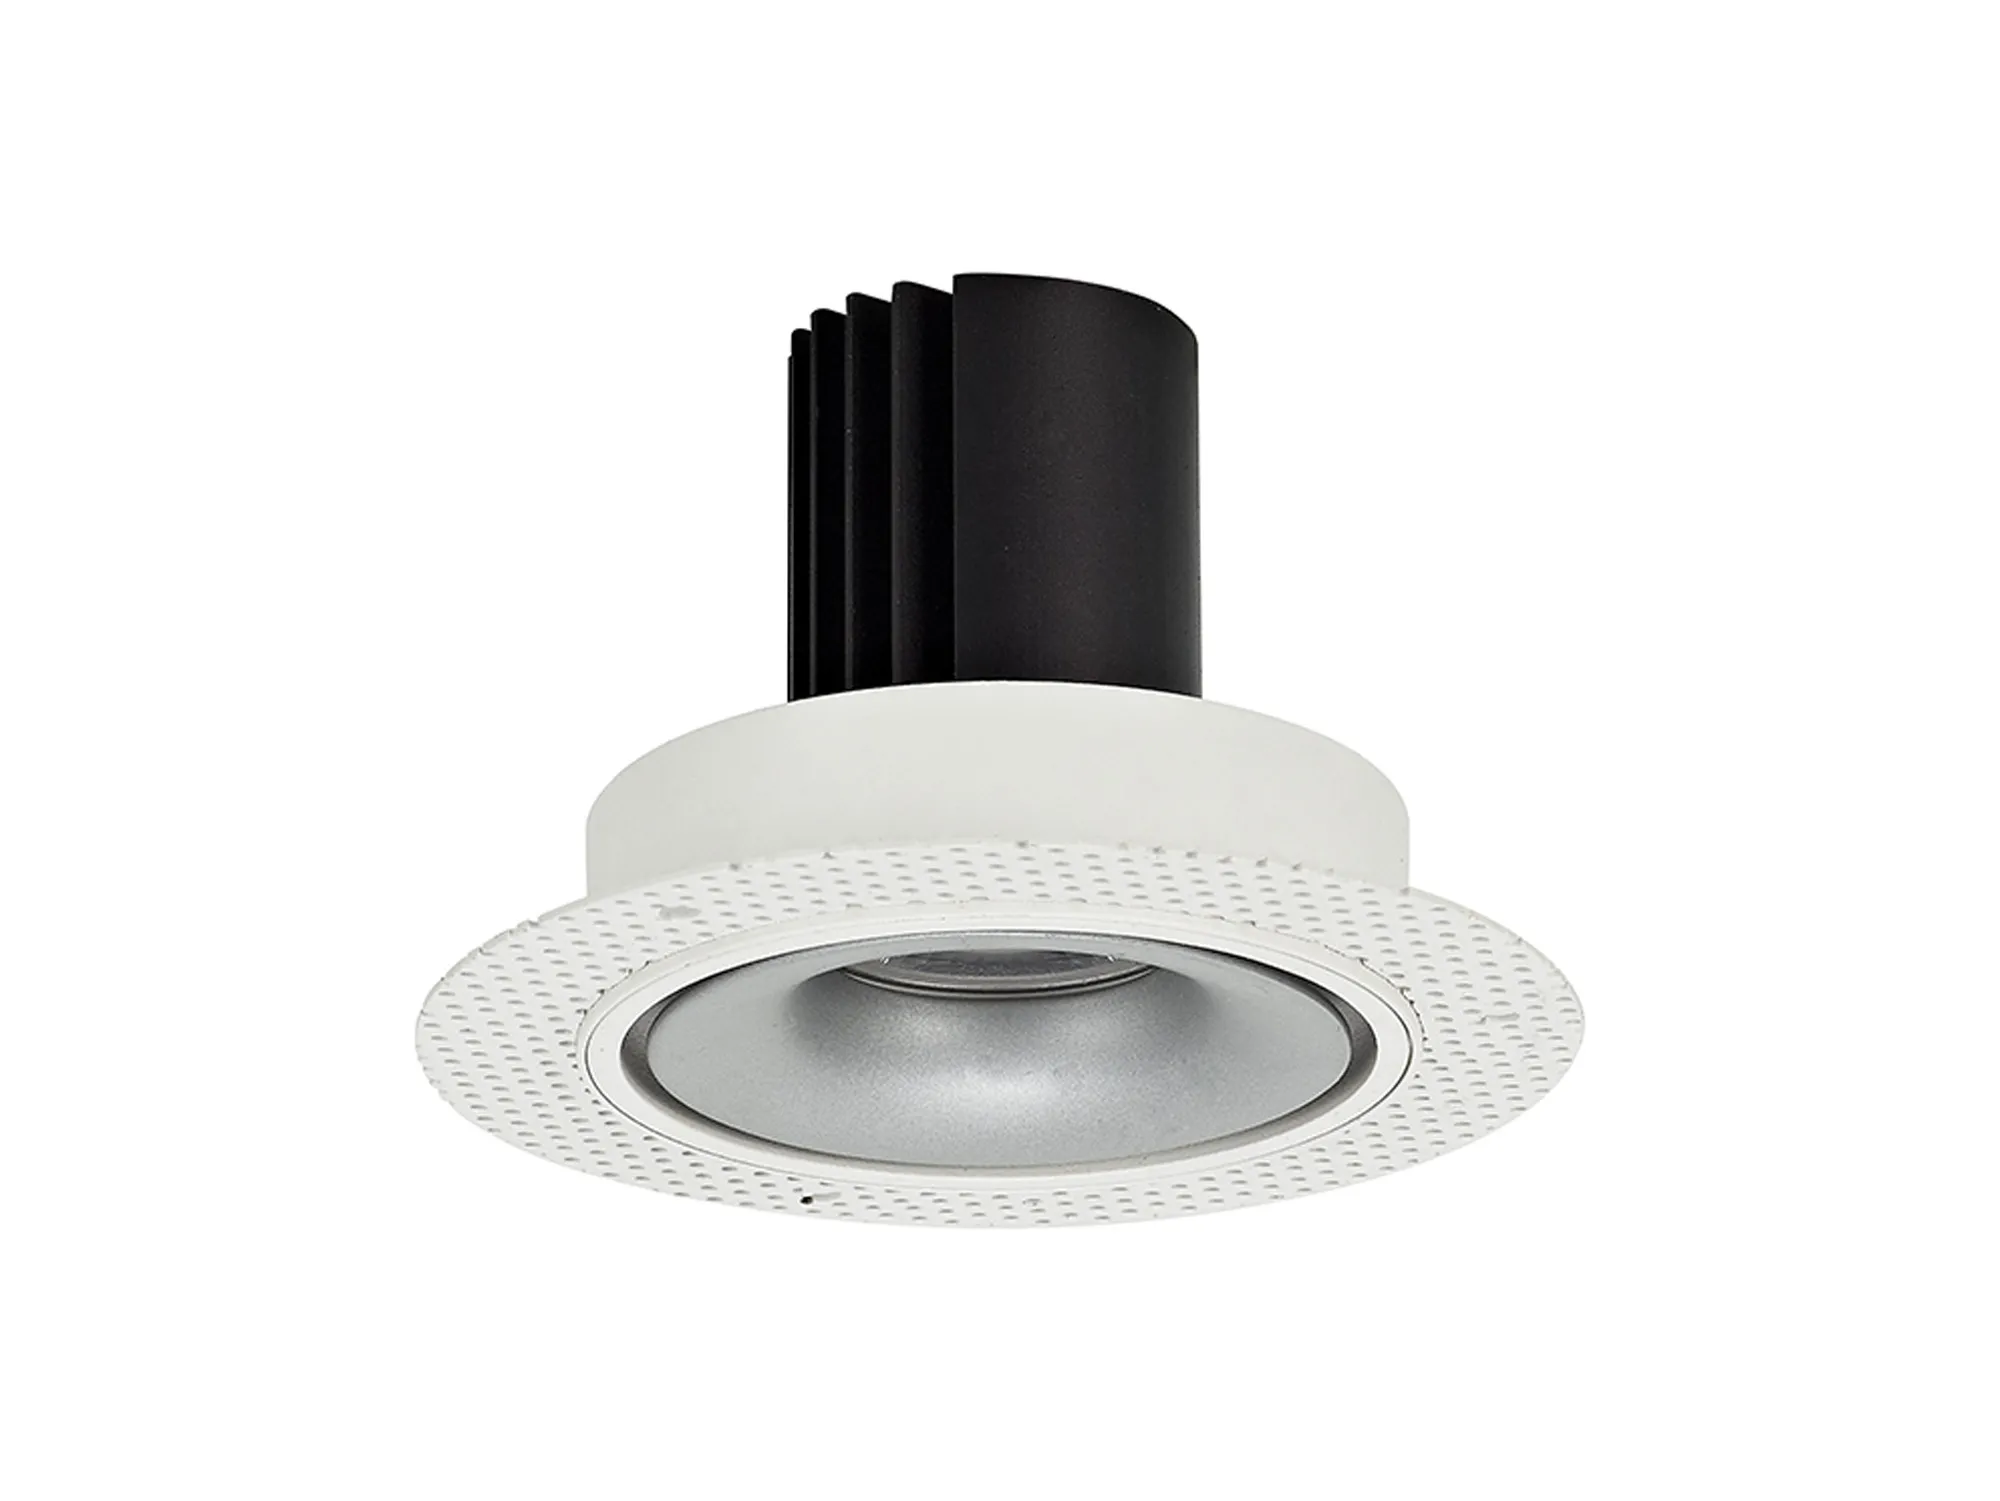 DM202193  Bolor T 12 Tridonic Powered 12W 3000K 1200lm 24° CRI>90 LED Engine White/Silver Trimless Fixed Recessed Spotlight; IP20